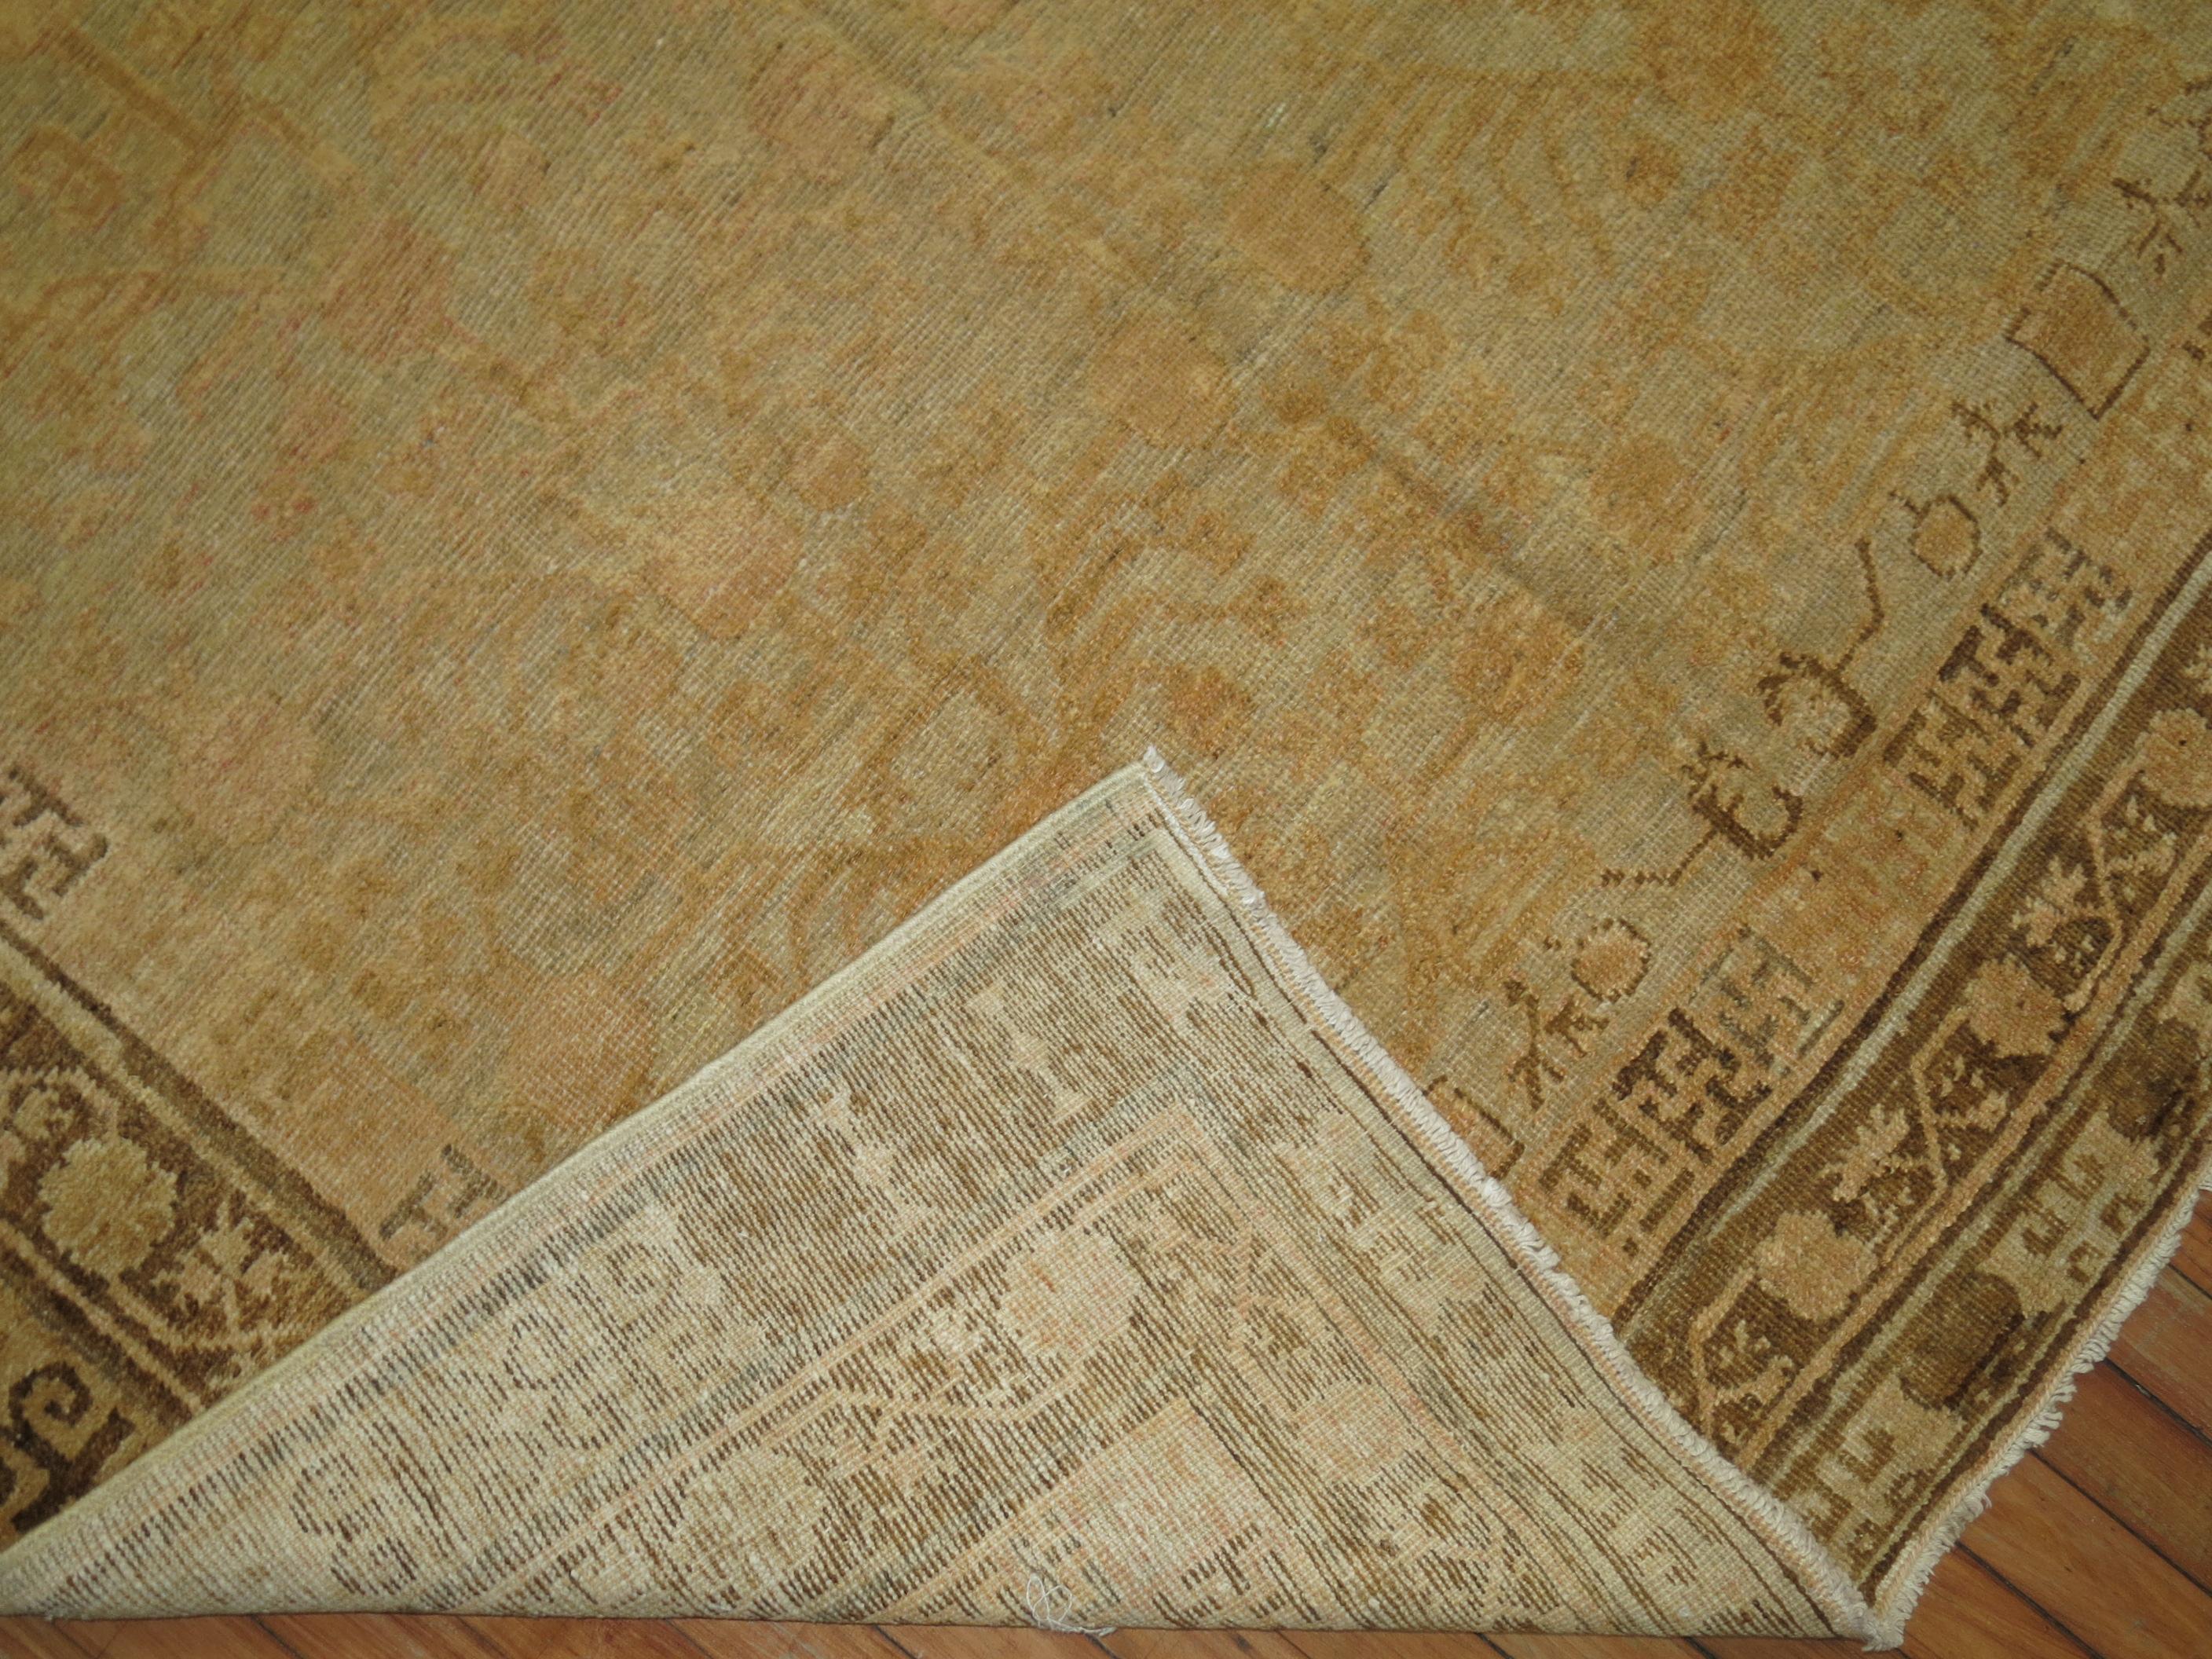 Hand-Knotted Khotan Carpet in Pale Colors